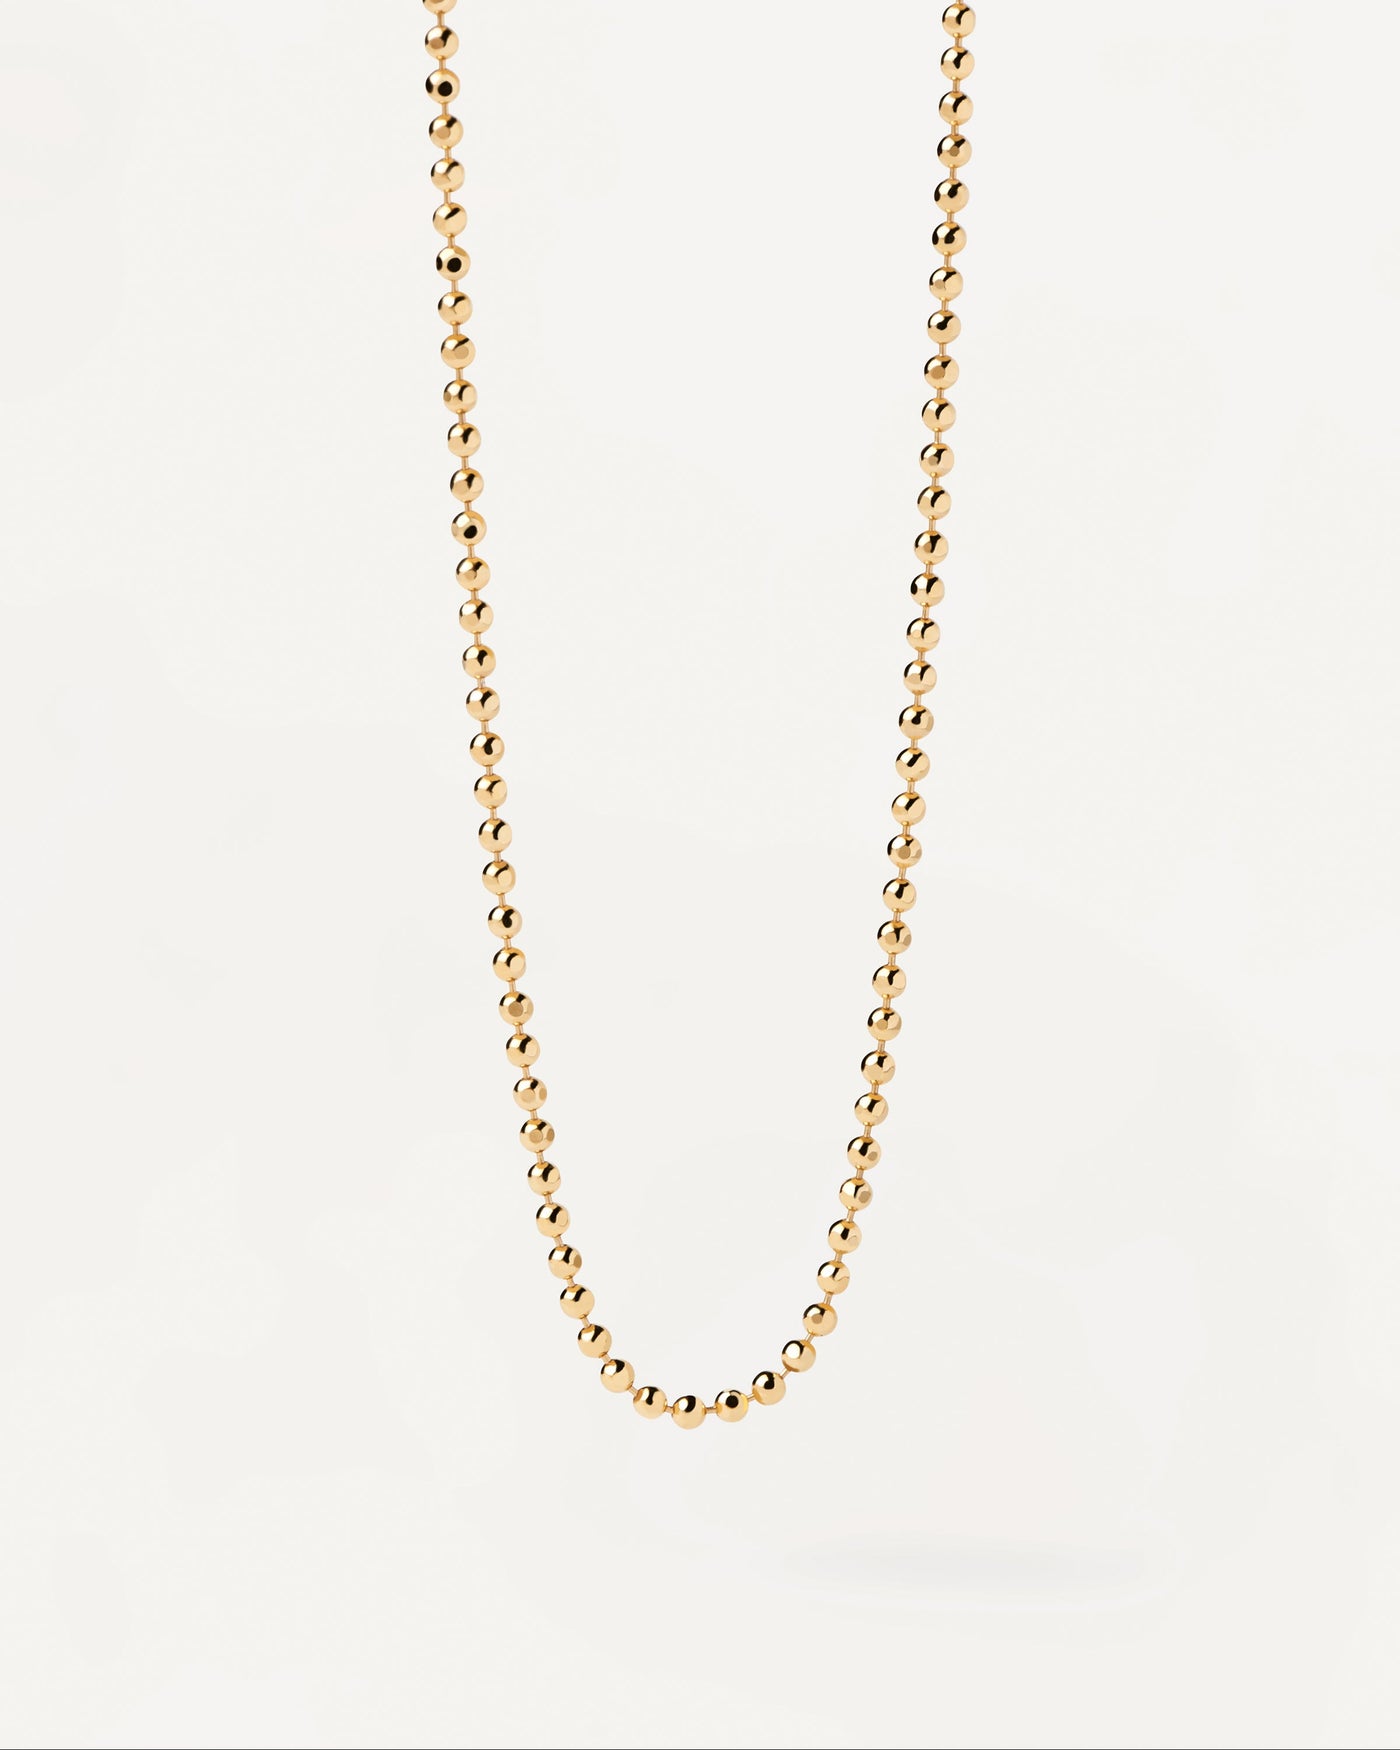 2023 Selection | Ball Chain Necklace. Ball-textured chain necklace in plain gold-plated silver. Get the latest arrival from PDPAOLA. Place your order safely and get this Best Seller. Free Shipping.